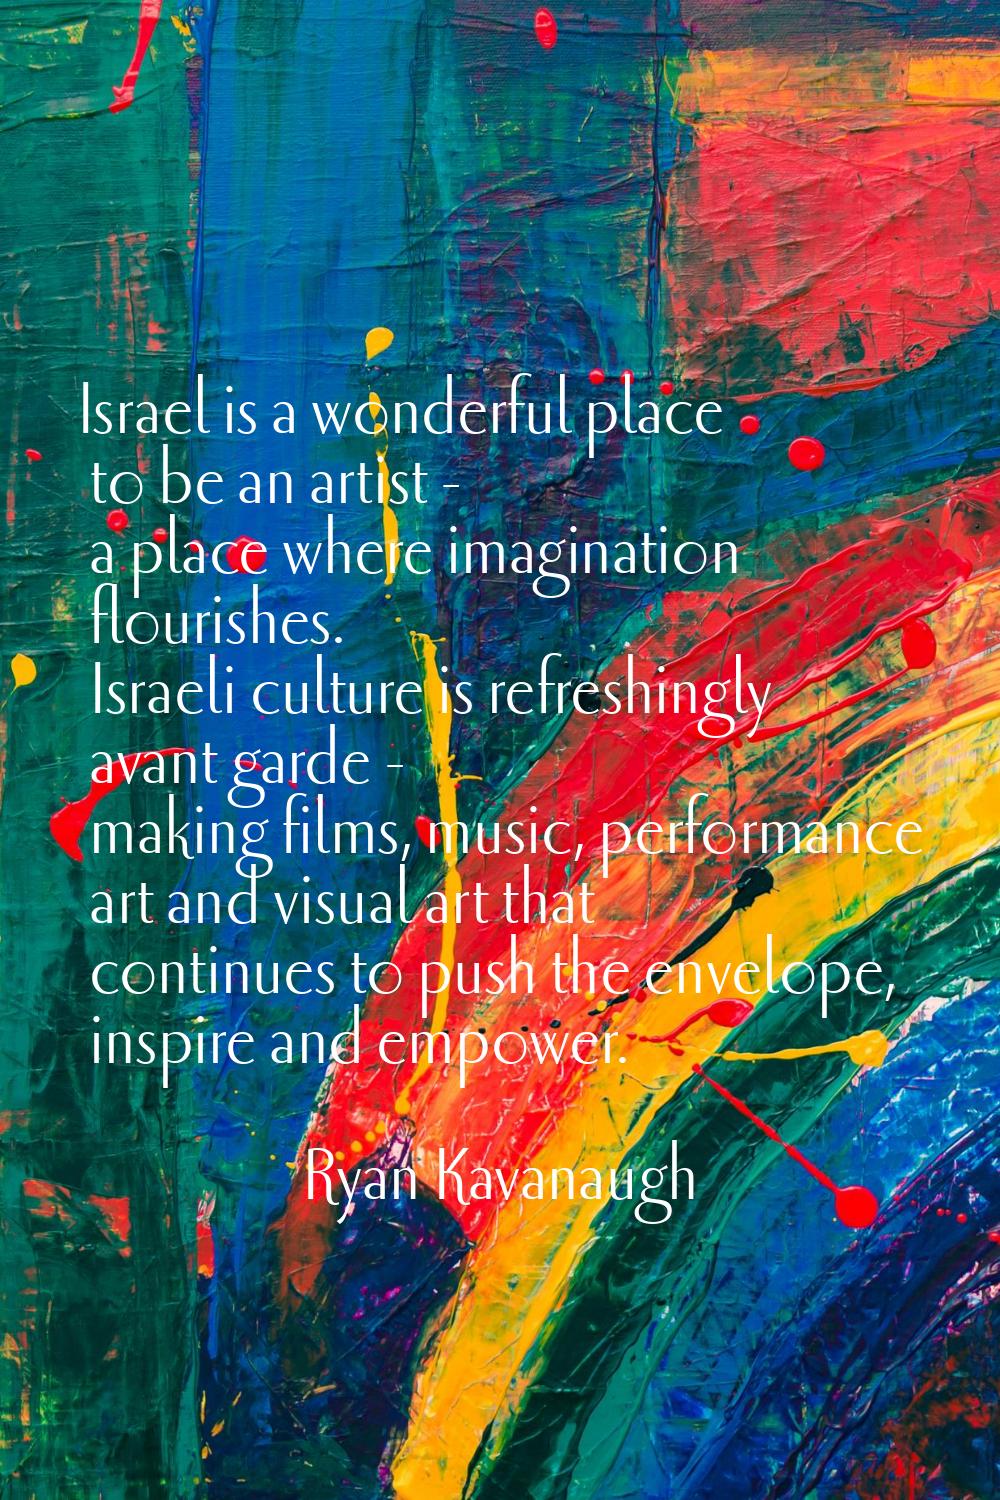 Israel is a wonderful place to be an artist - a place where imagination flourishes. Israeli culture